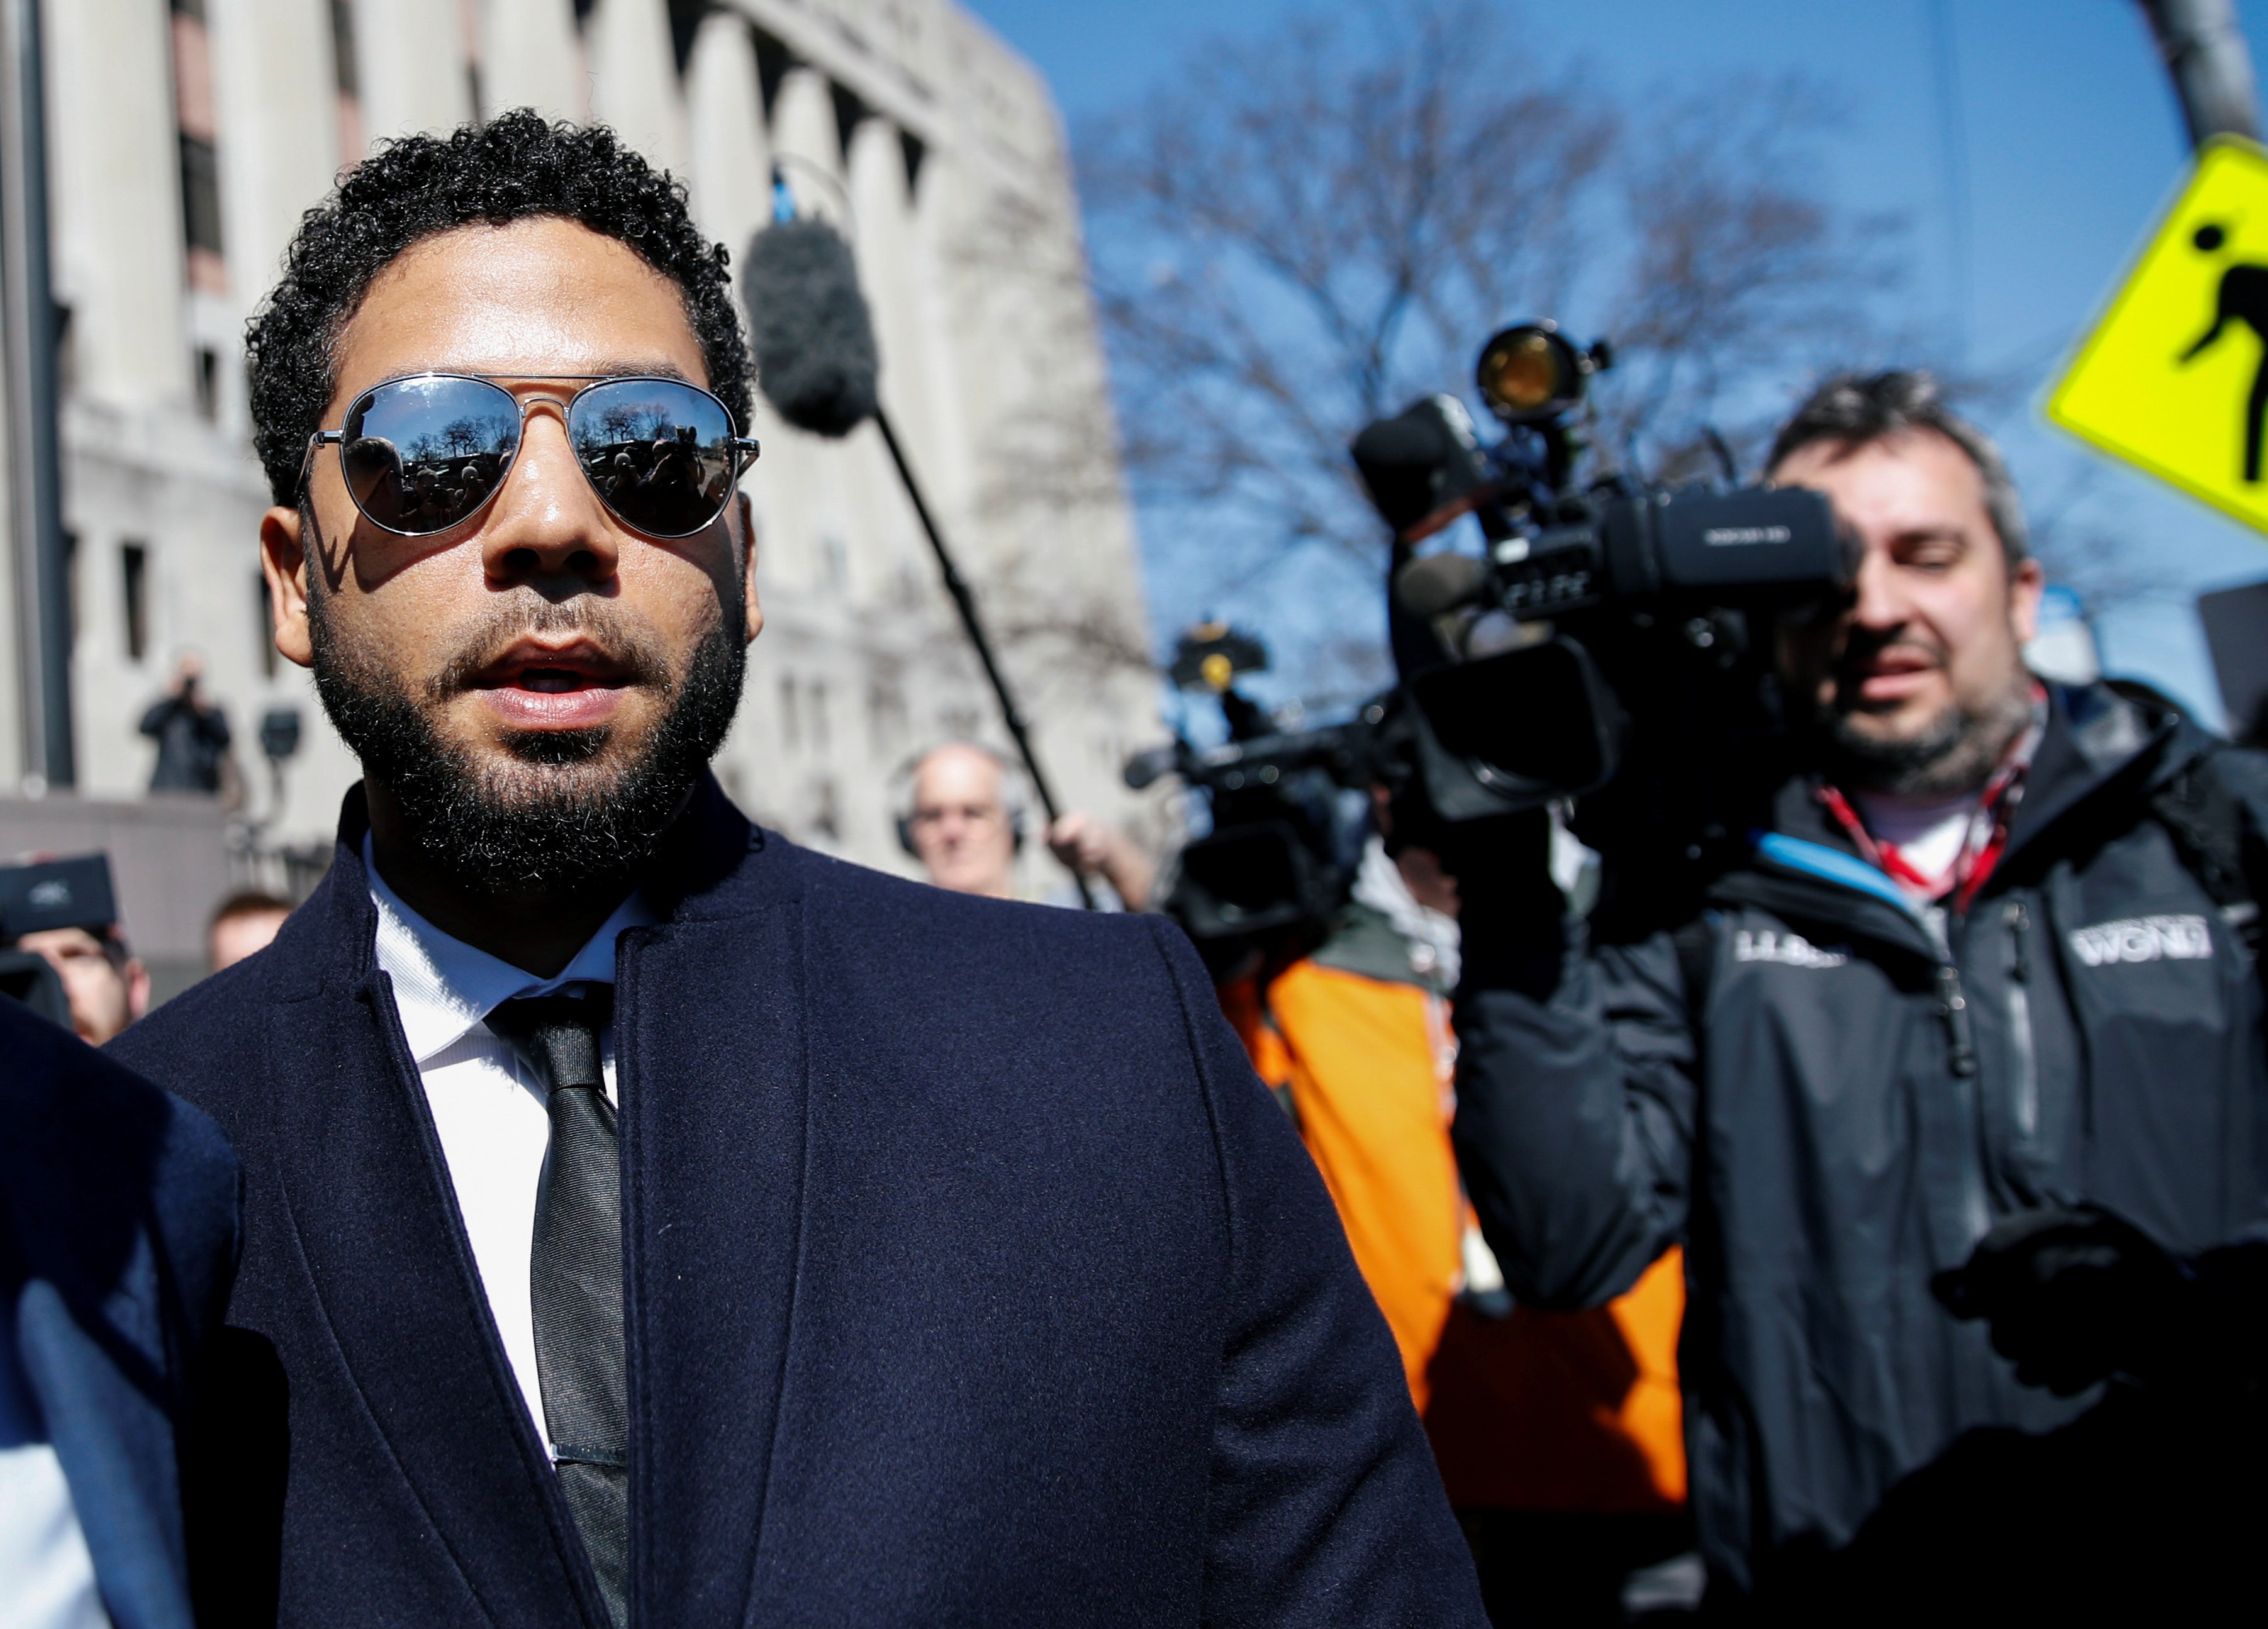 Jussie Smollett Flashback: Media, celebrities ran with false allegations made by ‘Empire’ star